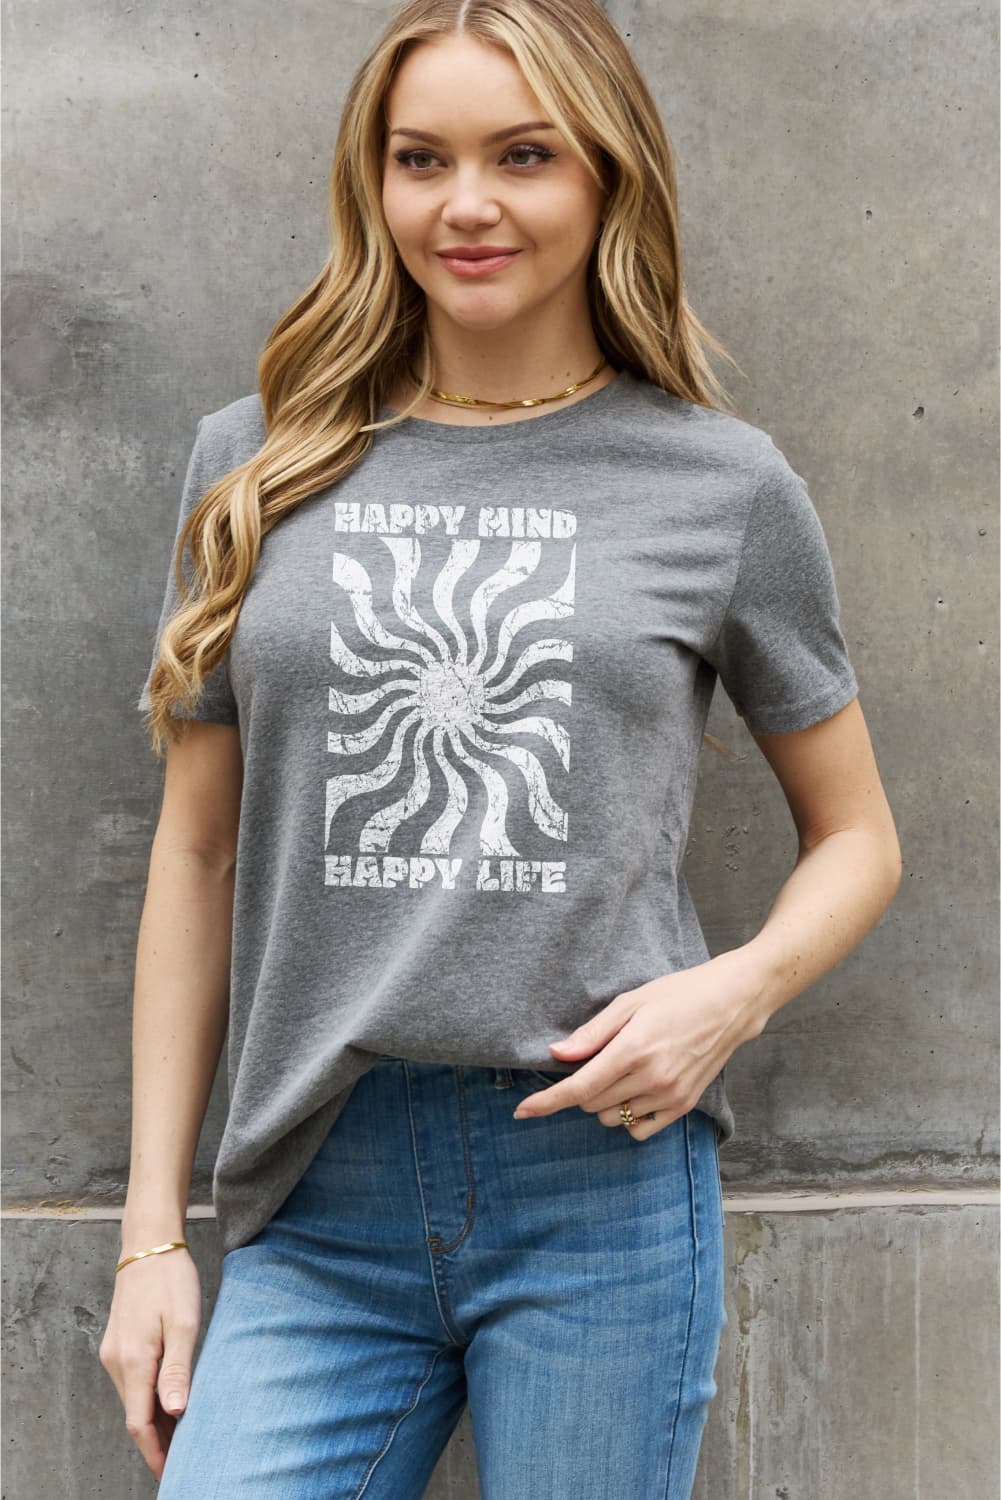 Light Slate Gray Simply Love Full Size HAPPY MIND HAPPY LIFE Graphic Cotton Tee Sentient Beauty Fashions Apparel & Accessories